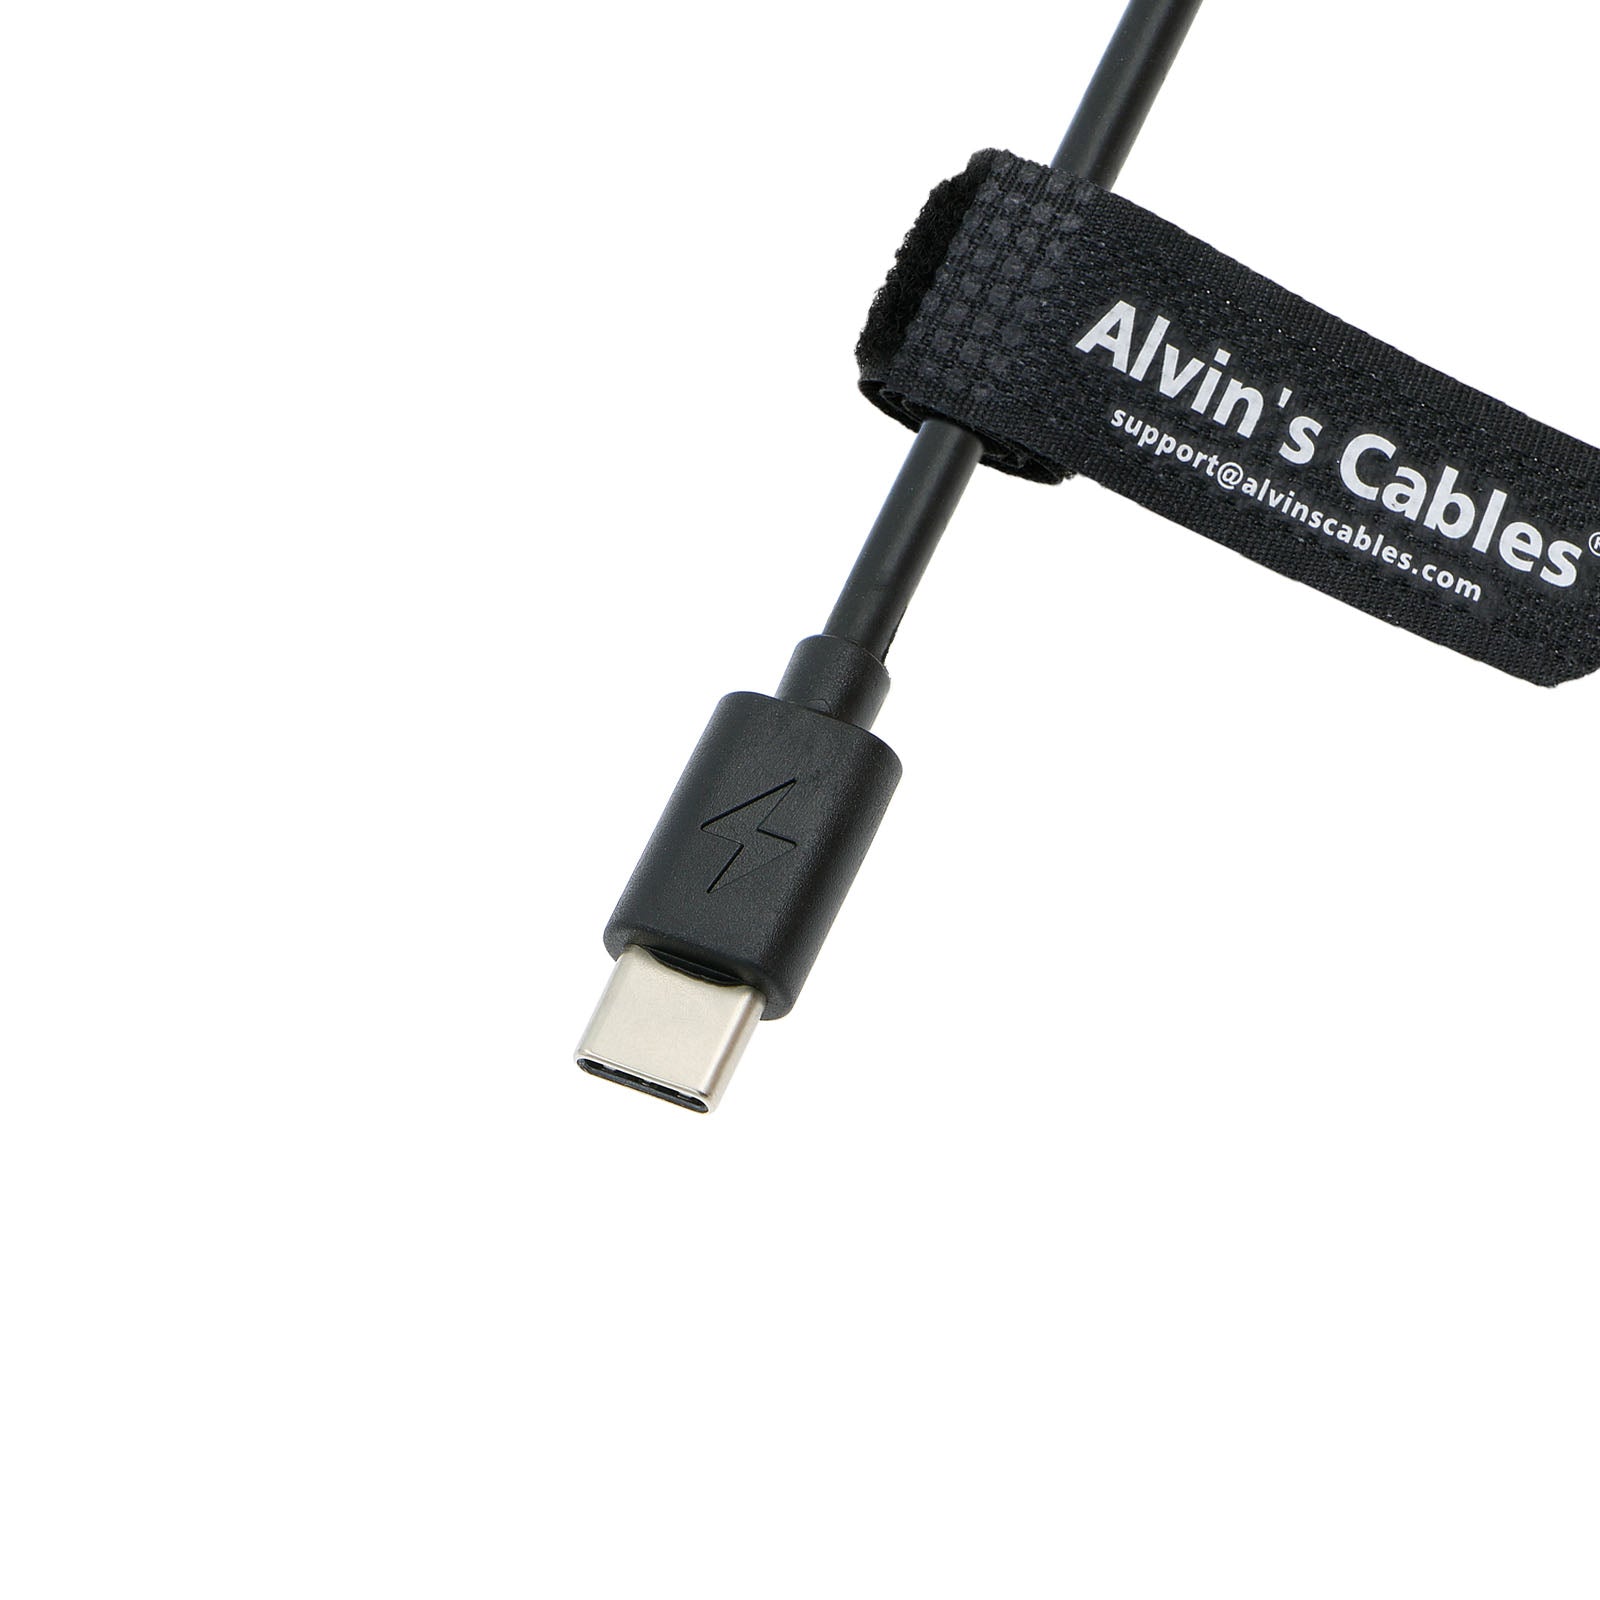 Alvin's Cables LP-E8 Dummy Battery to PD USB C Decoded LP-E8 Battery Replacement Coiled Power Cable for Canon EOS 700D 650D 600D 550D Rebel T5i T4i T3i T2i Cameras